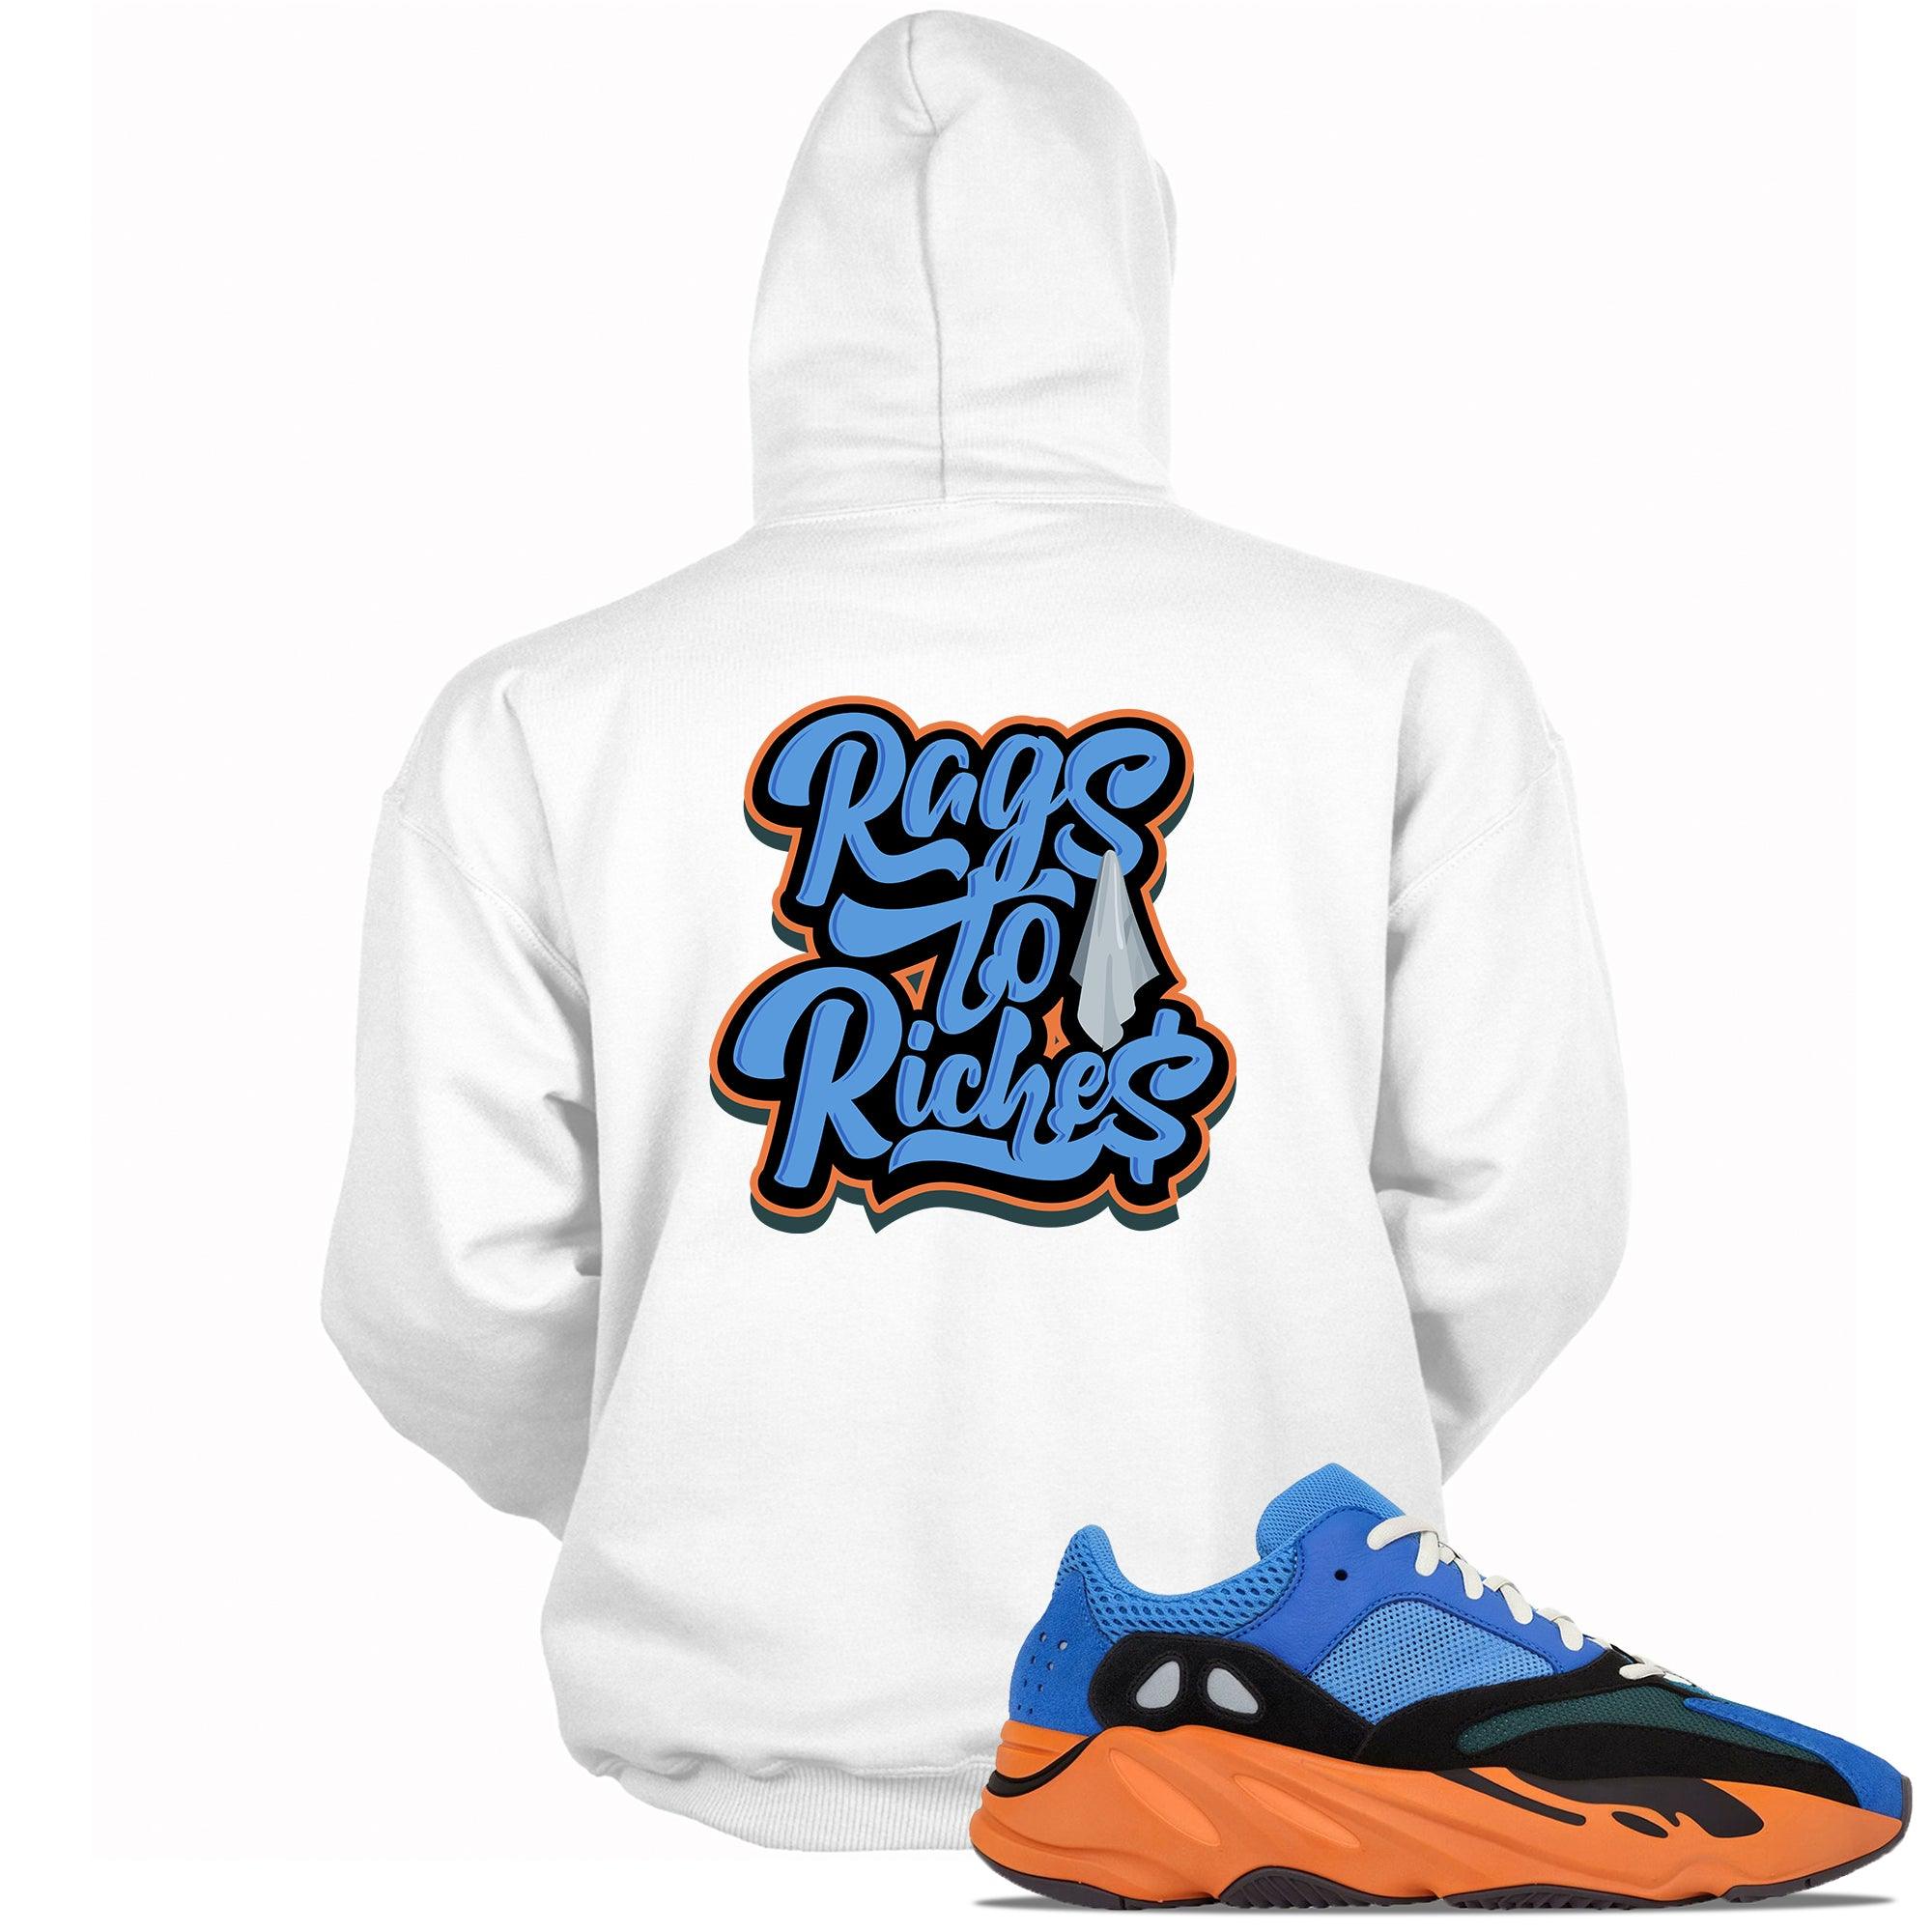 Rags To Riches Hoodie Yeezy Boost 700s Bright Blue photo